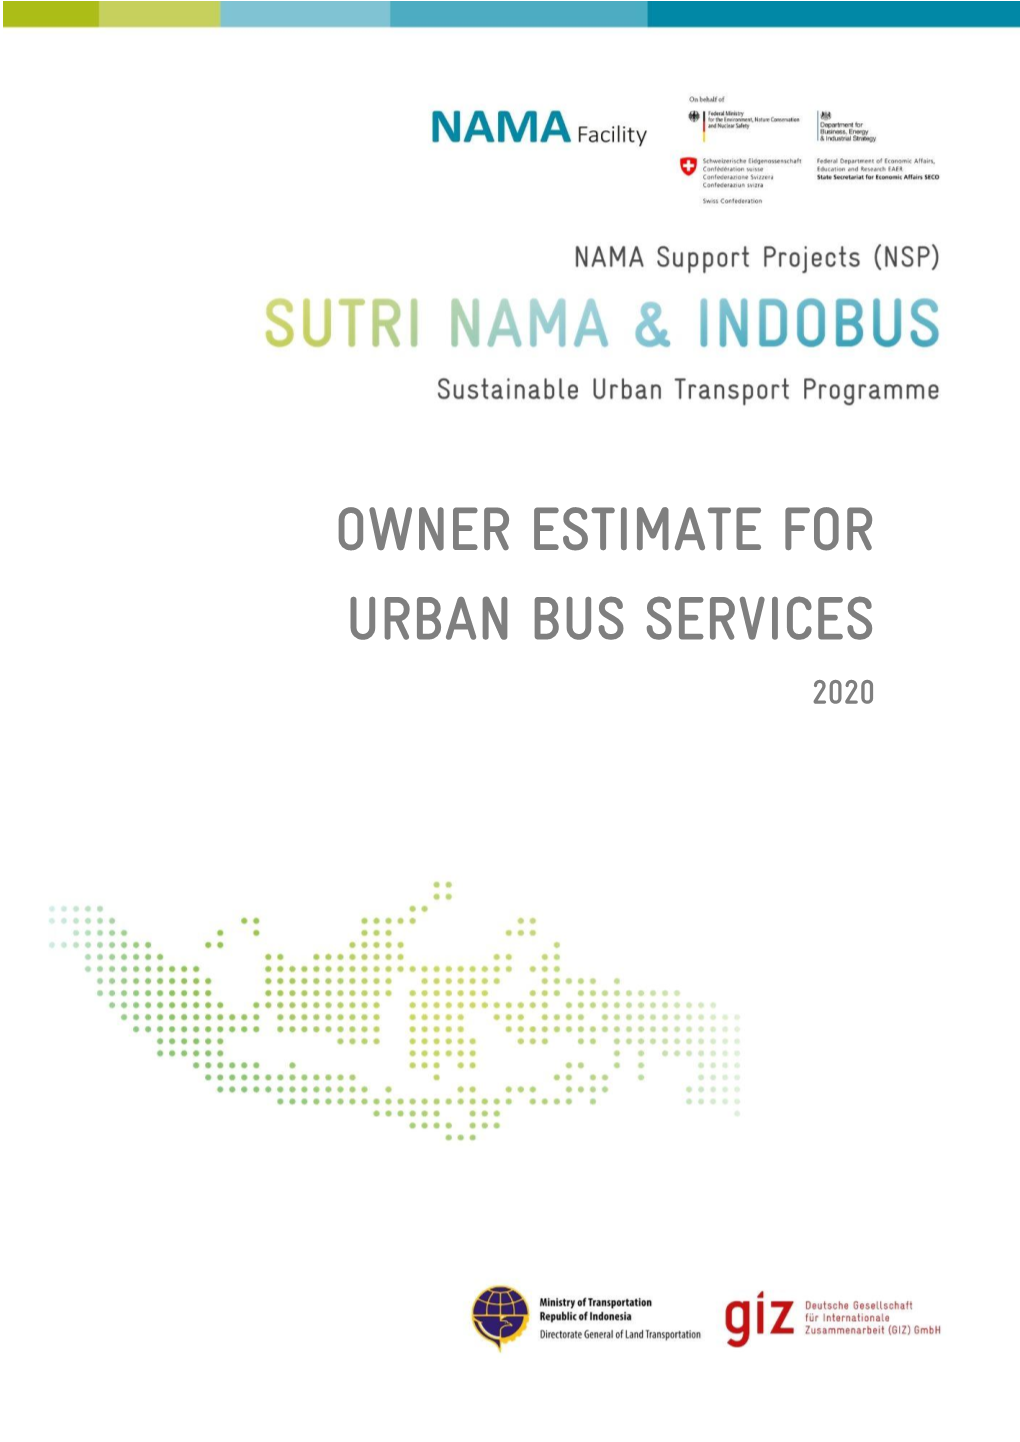 Owner Estimate for Urban Bus Services 2020